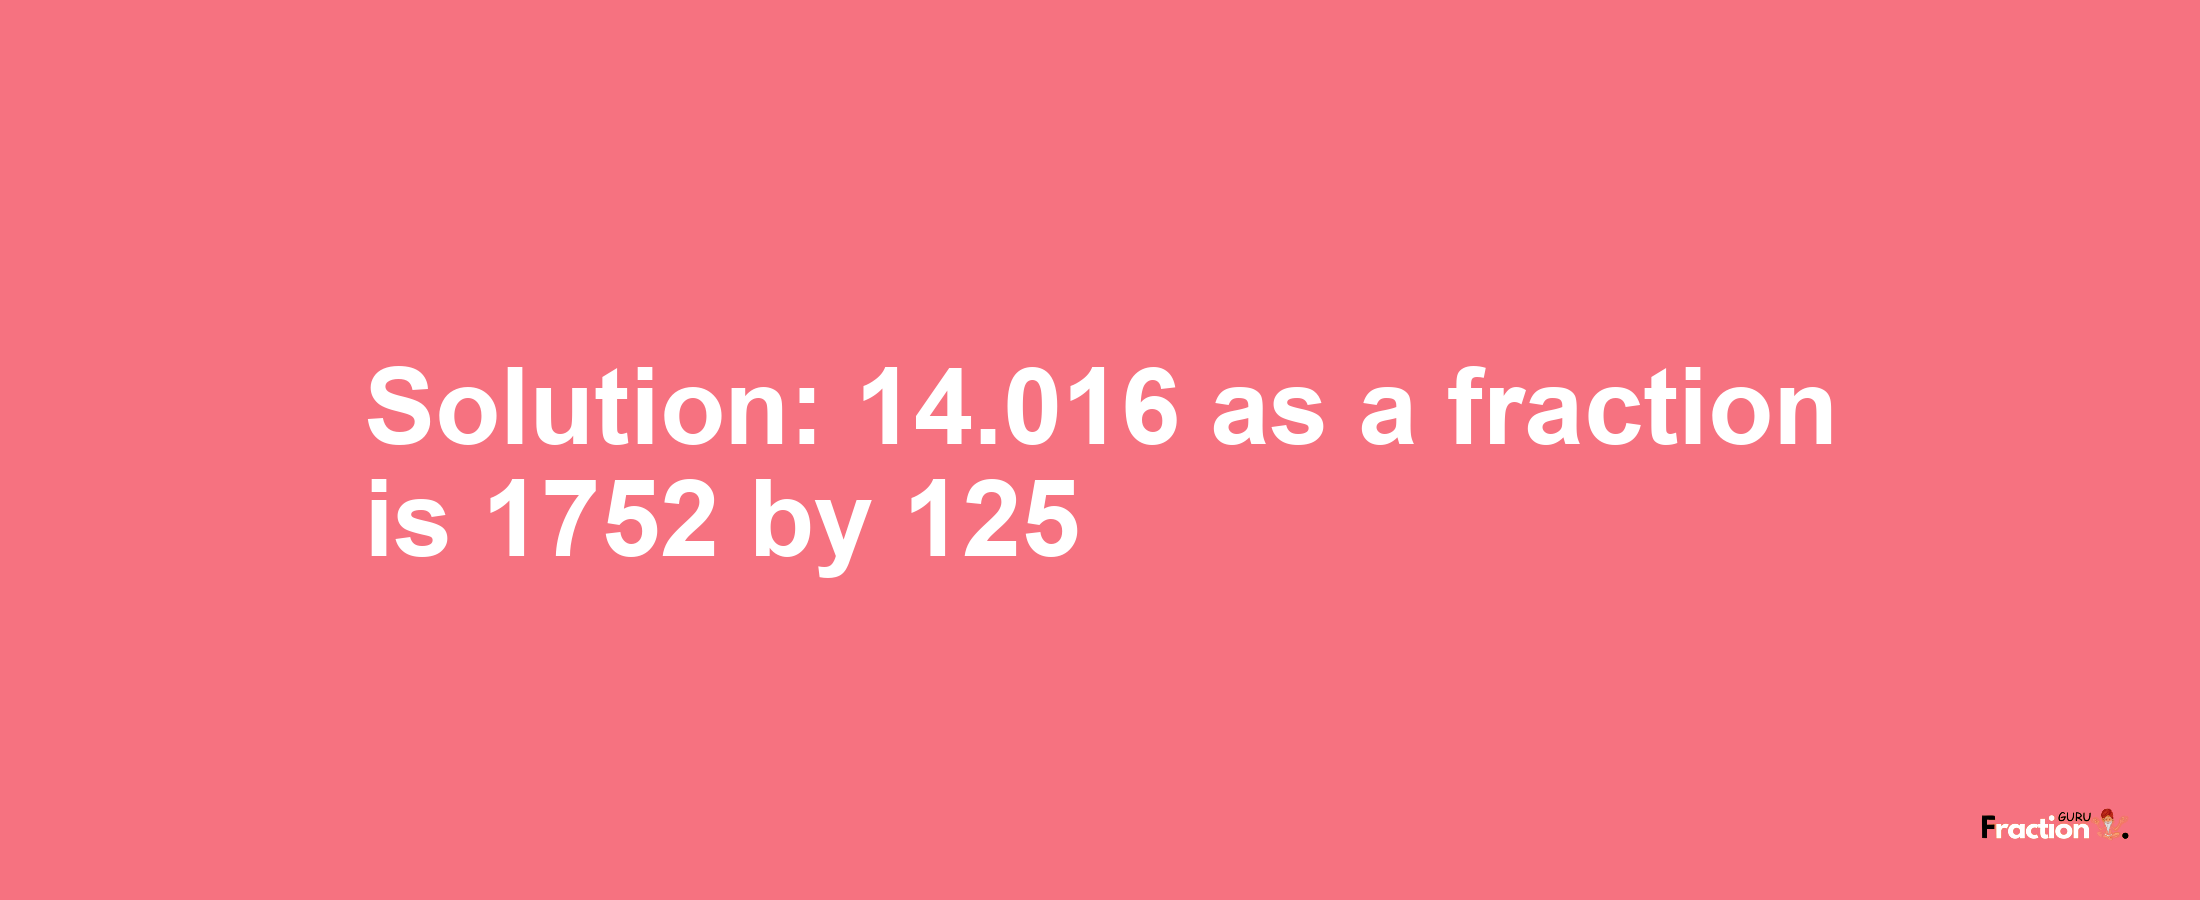 Solution:14.016 as a fraction is 1752/125